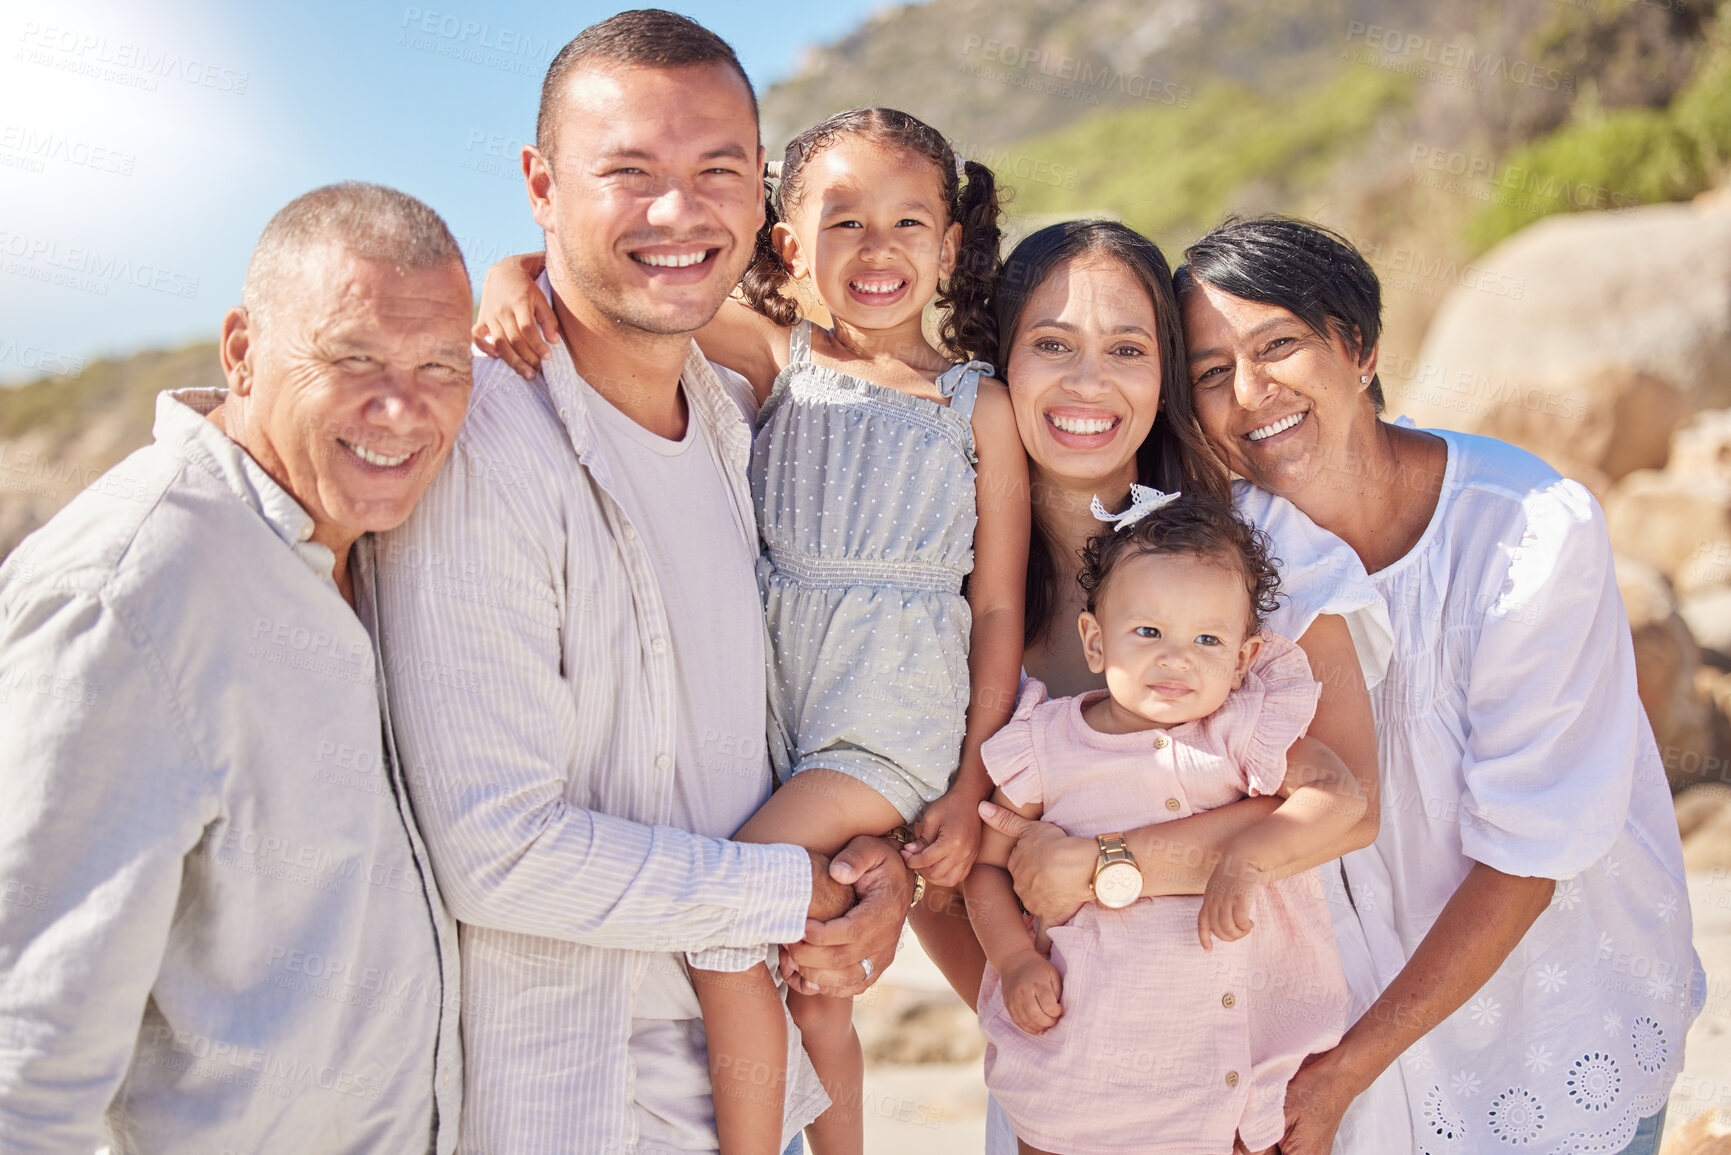 Buy stock photo Portrait of smiling mixed race family with little girls standing  together on beach. Adorable little kids bonding with mother, father, grandmother and grandfather outside